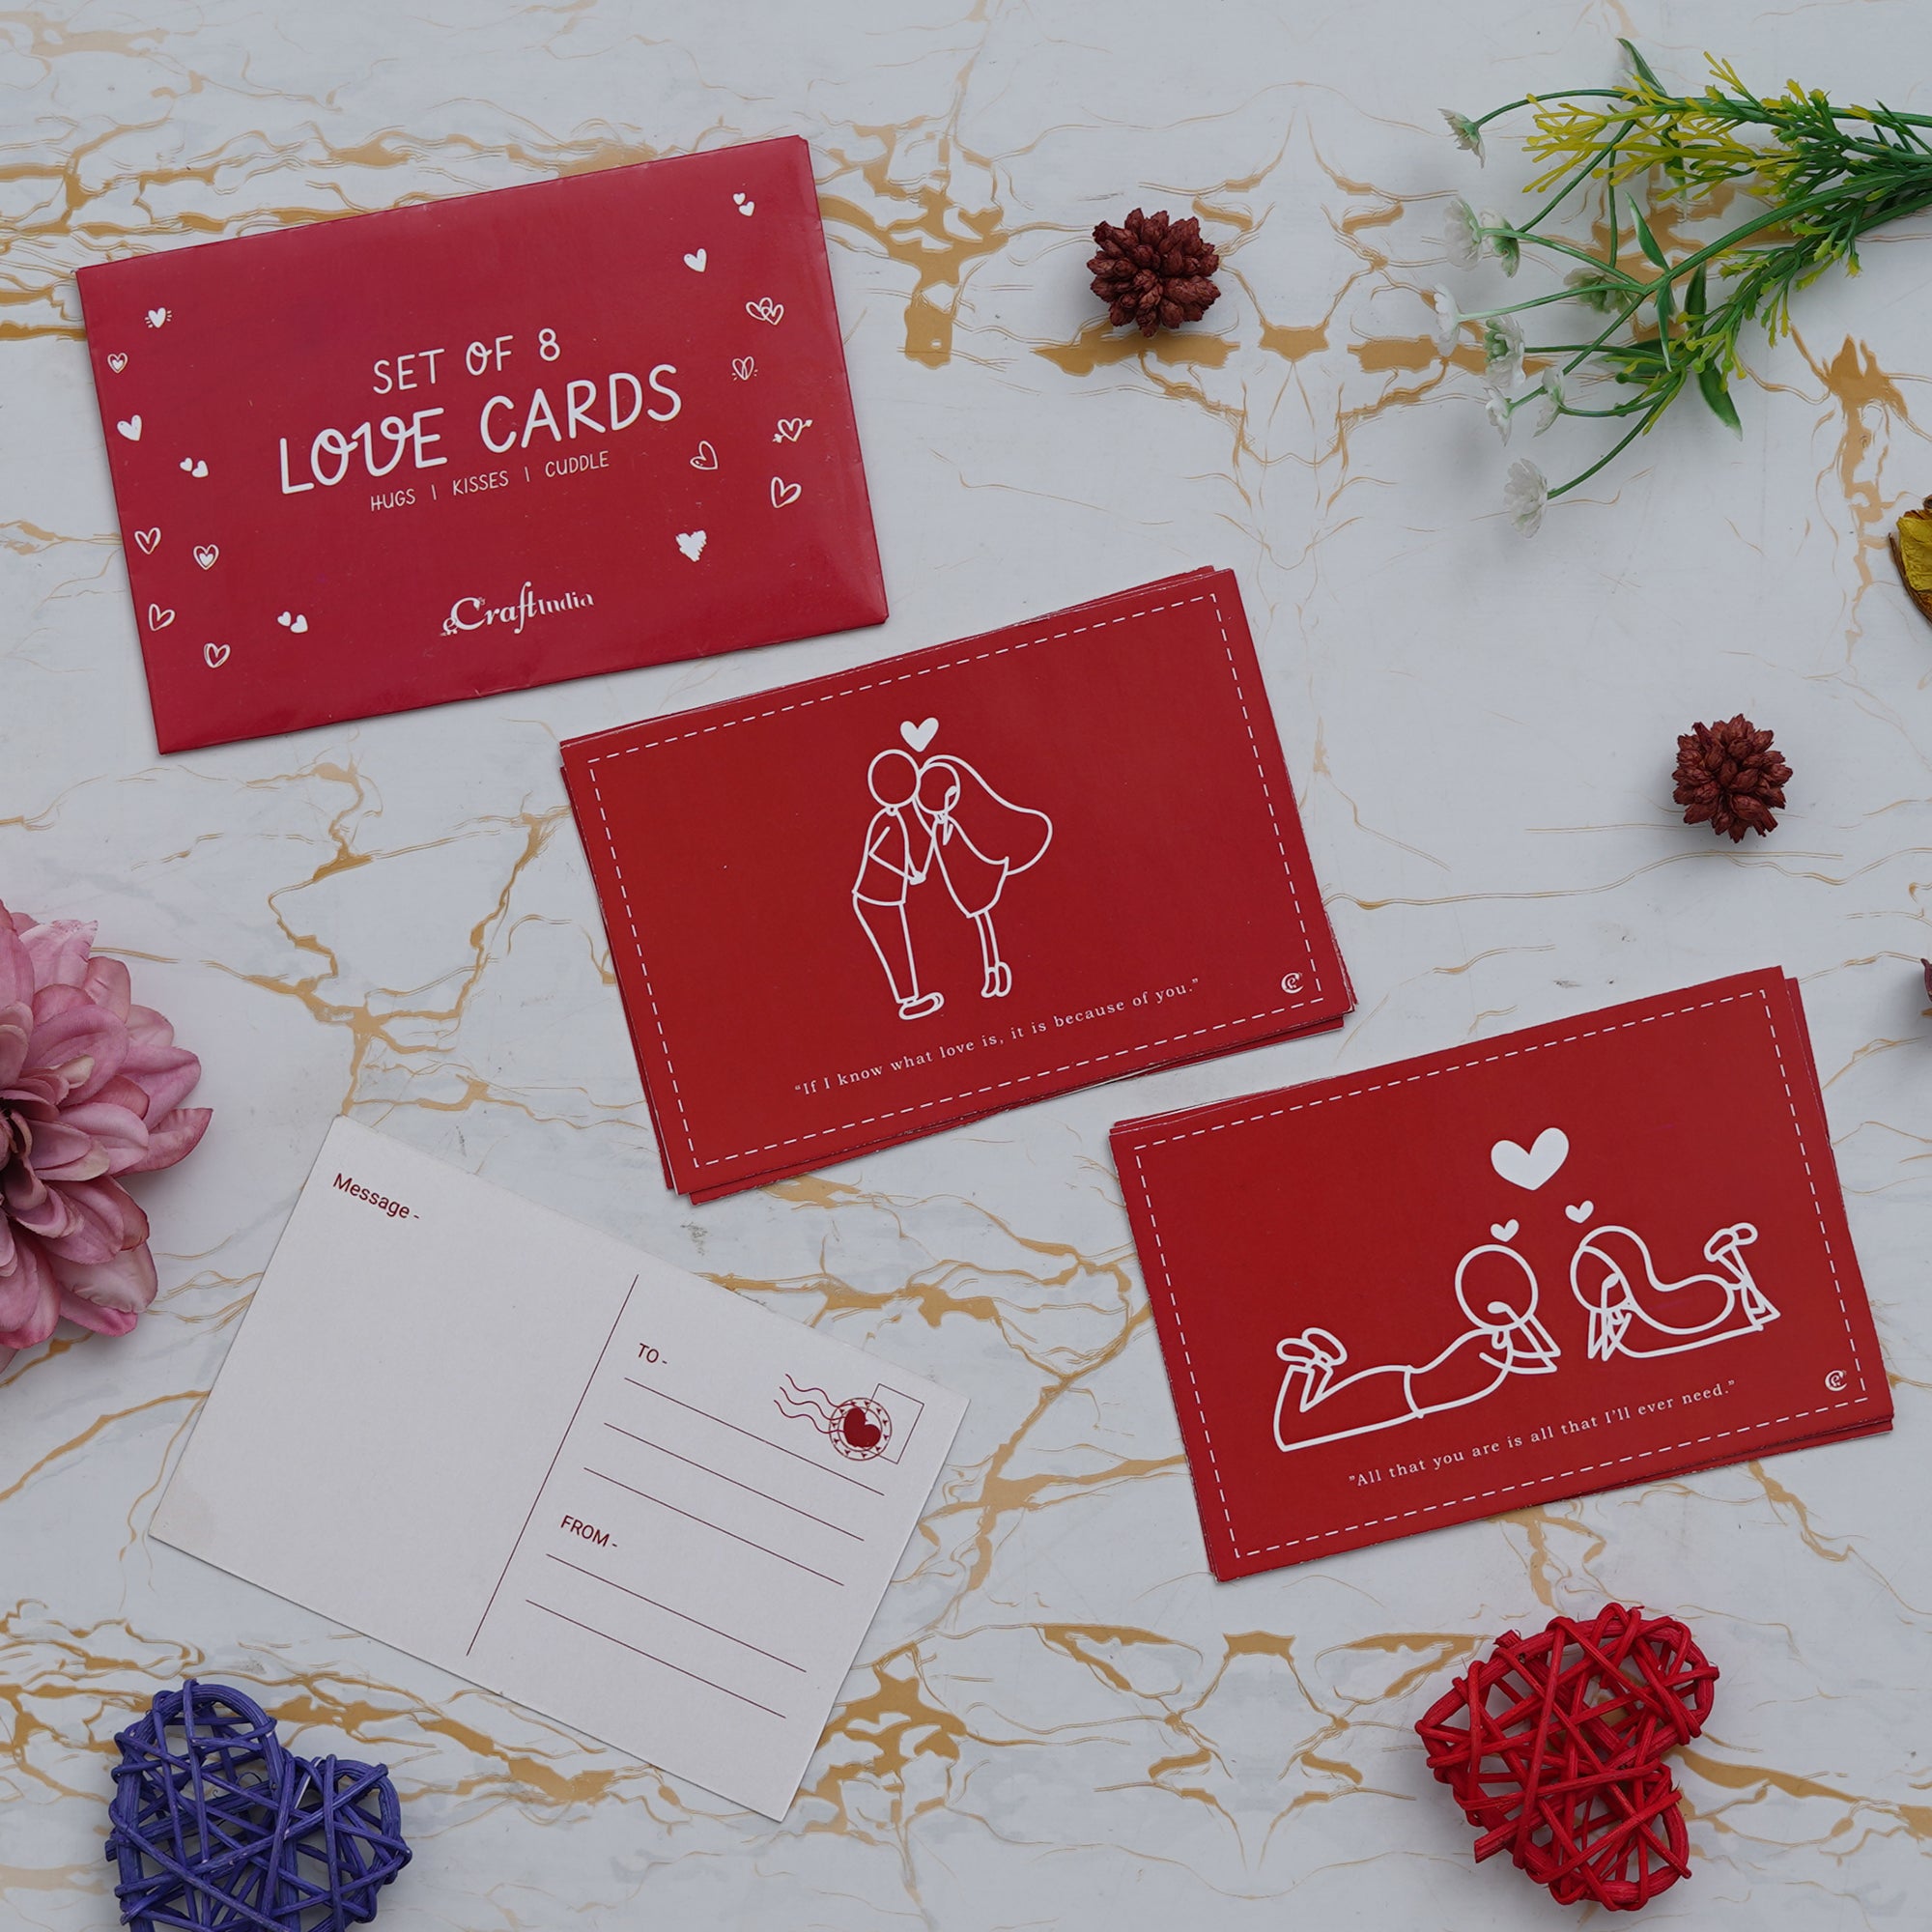 Valentine Combo of Pack of 8 Love Gift Cards, "20 Reasons Why I Love You" Printed on Little Red Hearts Decorative Wooden Gift Set Box 1